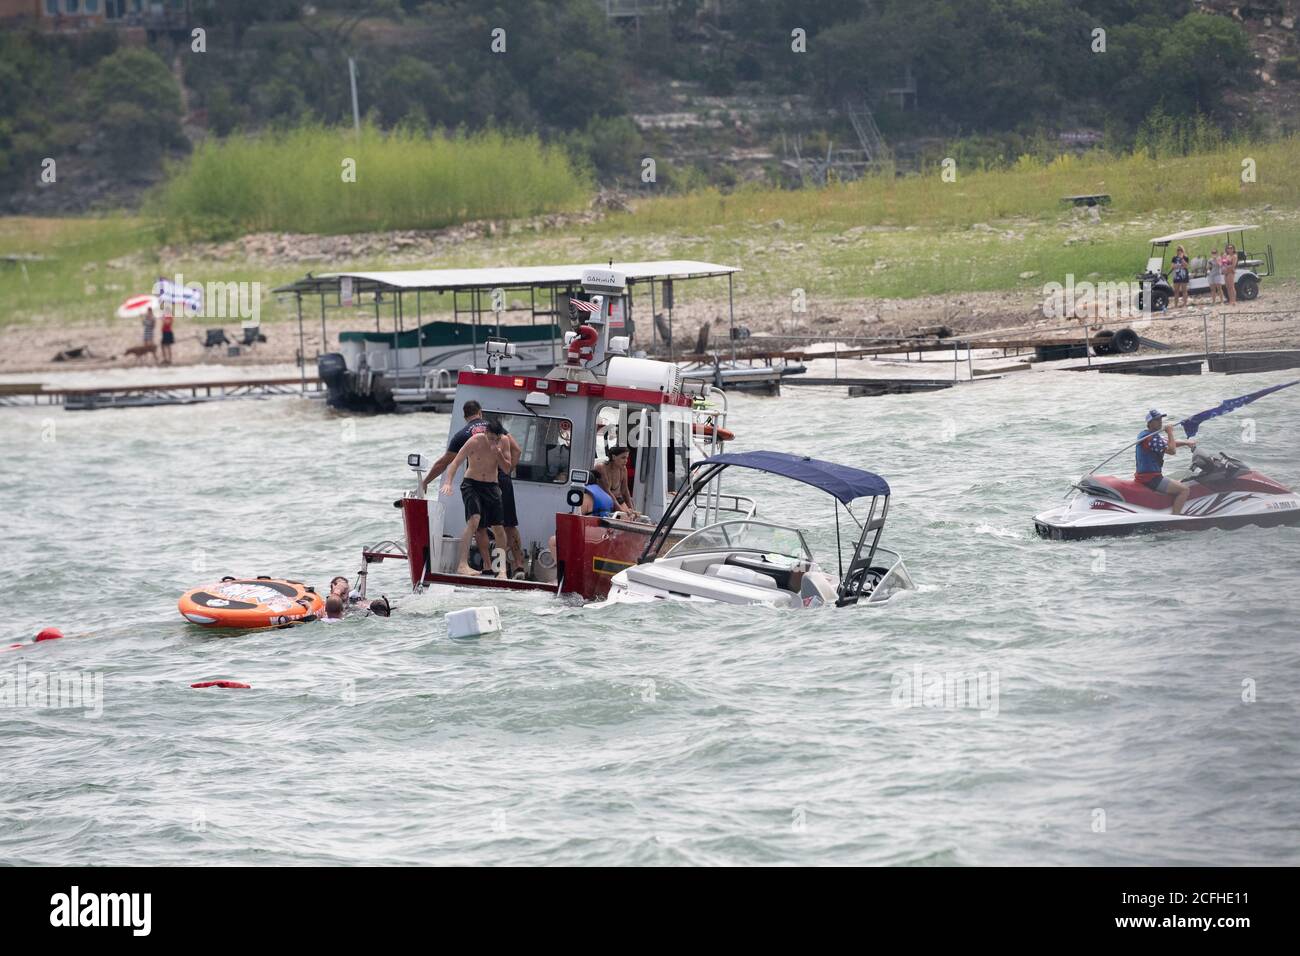 Lakeway, Texas USA Sept. 5, 2020: A small pleasure boat sits partially submerged after being swamped by large waves kicked up by wakes from water crafts participating in a pro-Donald Trump boat parade on Lake Travis. A total of five boats were swamped or sunk during the Labor Day Weekend event, which attracted hundreds of boaters. Stock Photo